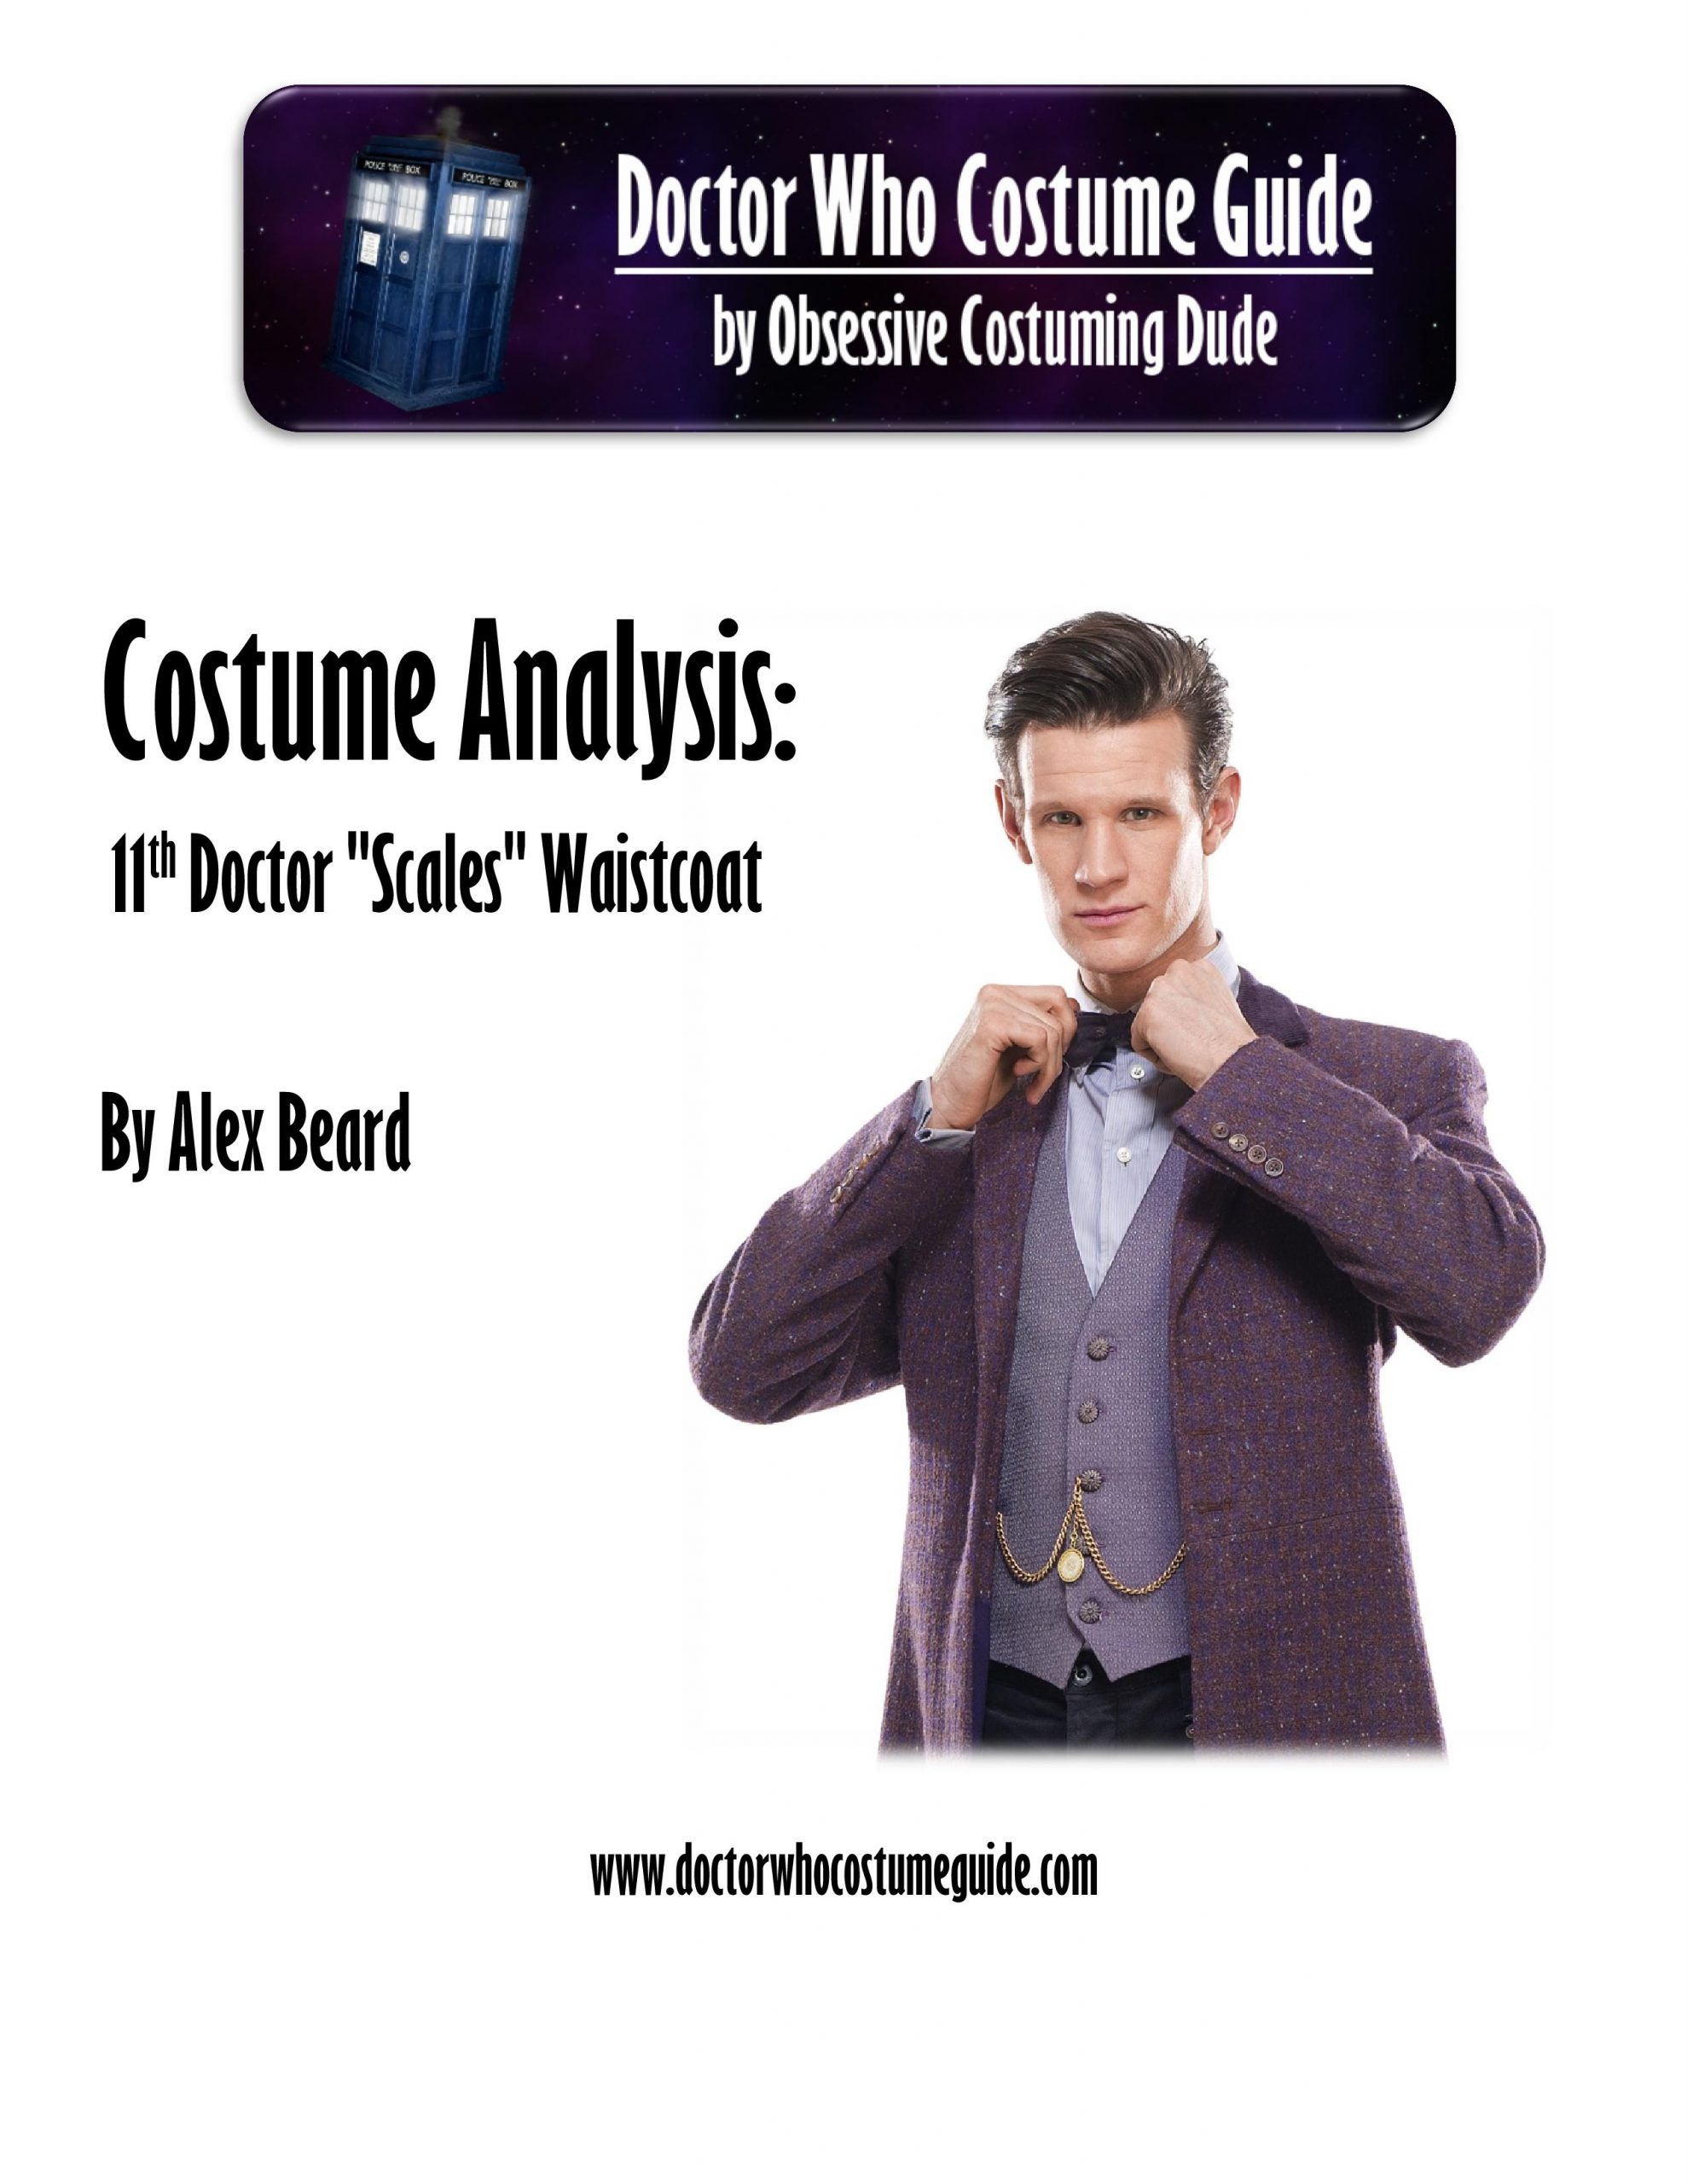 11th Doctor "scales" waistcoat costume analysis - Doctor Who Costume Guide